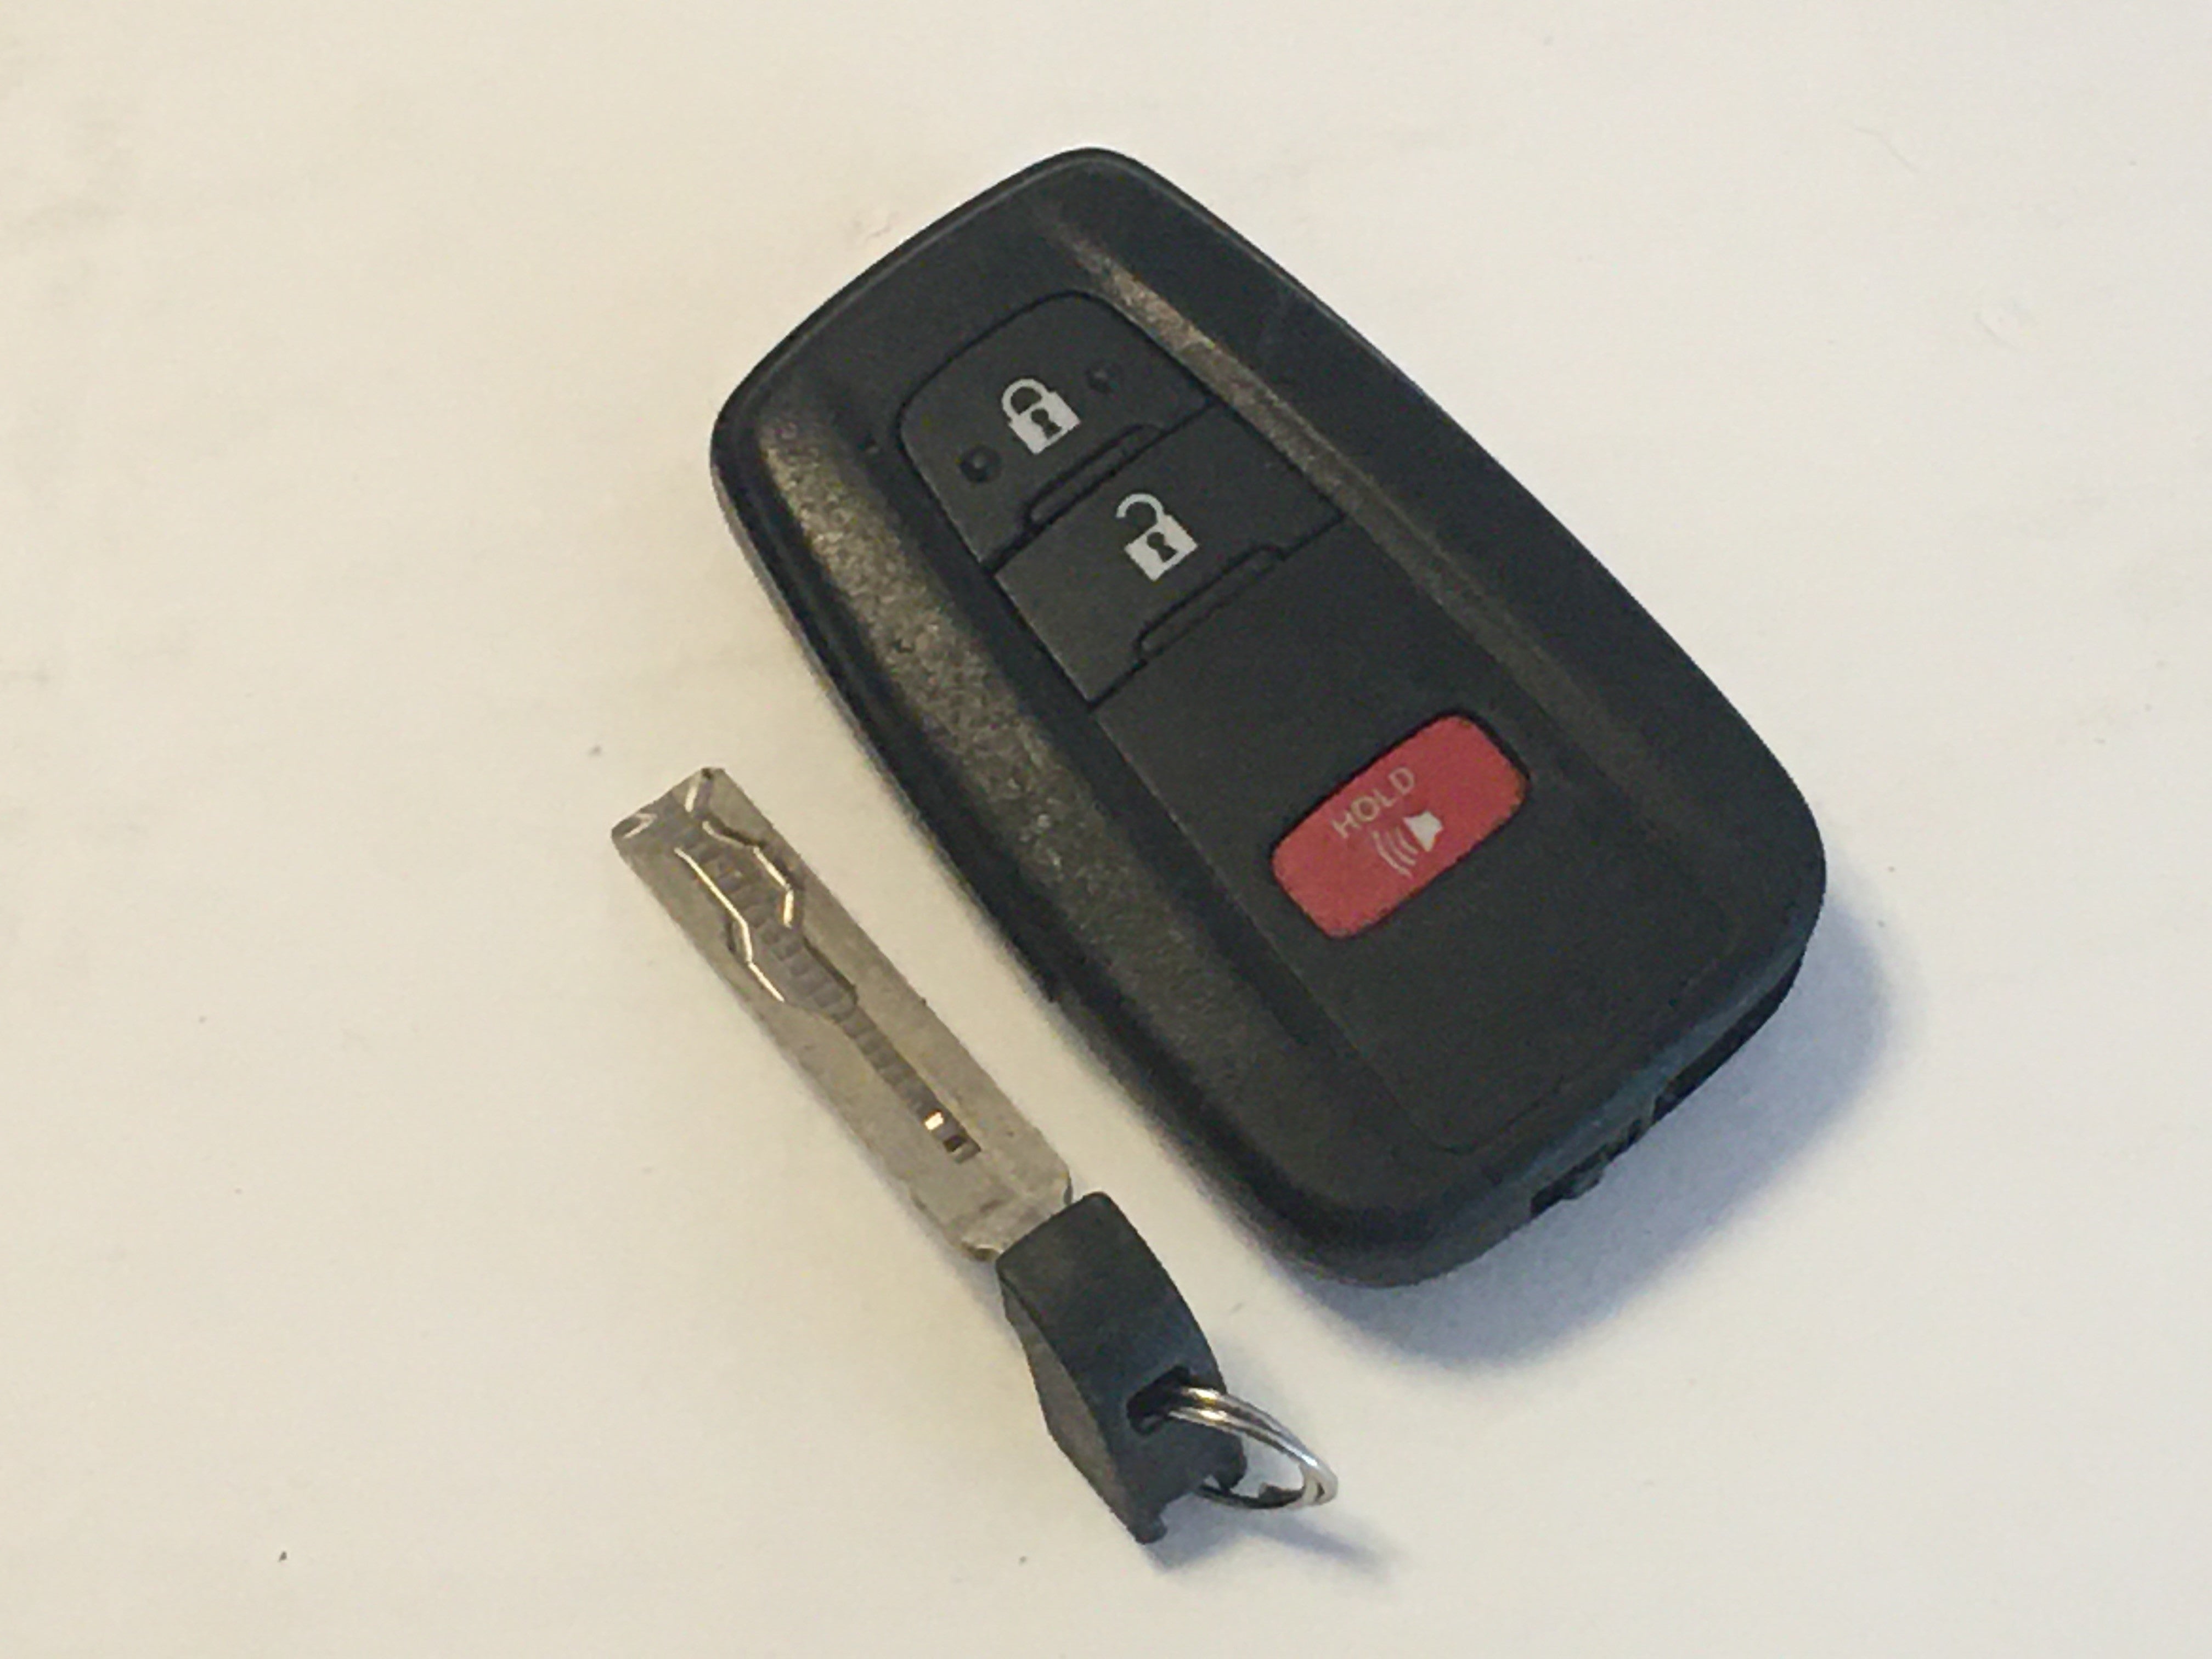 2018-2019 Toyota C-Hr Keyless Entry Remote Mozbr1et 2584a-Br1et  3 Buttons - Oemusedautoparts1.com